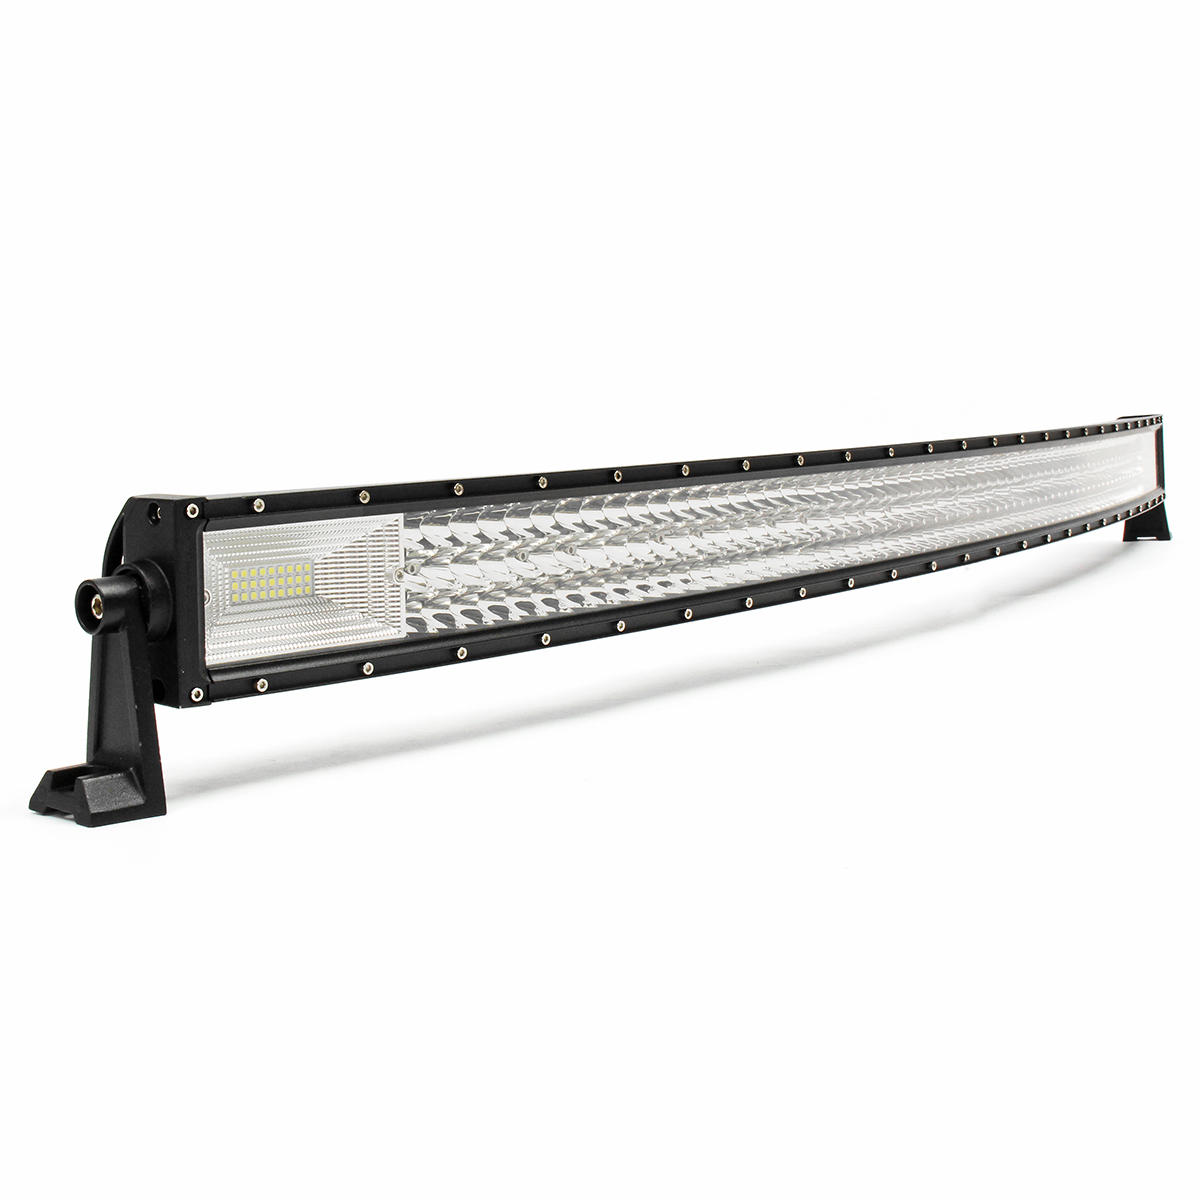 Image of 52Inch LED Work Light Bars Tri Row Combo Beam IP68 DC10-30V 468W 46800LM 6000K for Off Road SUV ATV